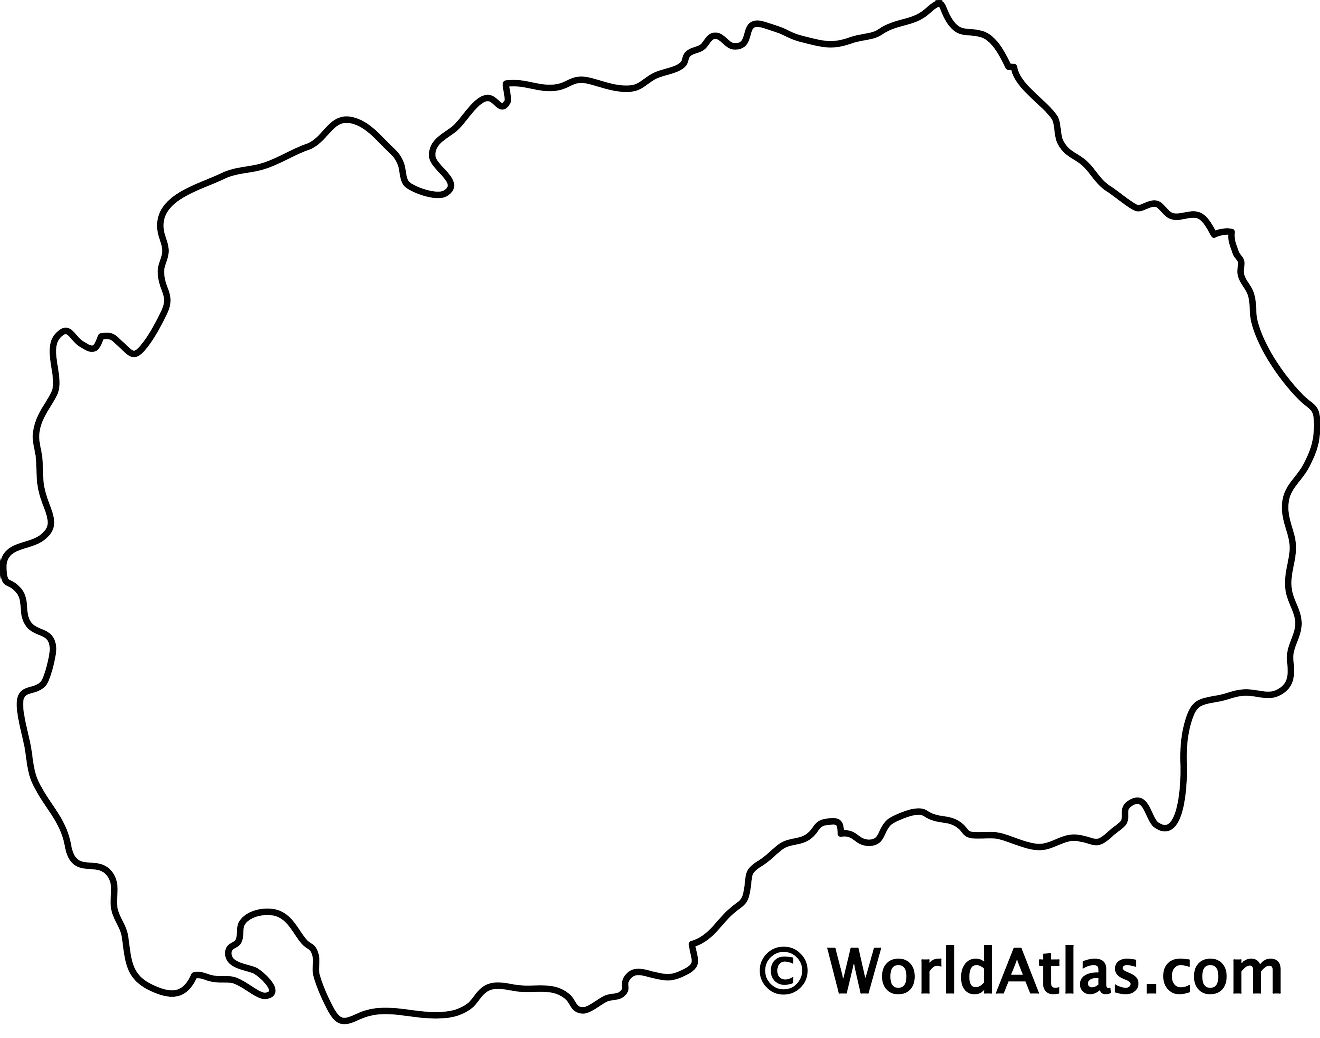 Blank Outline Map of North Macedonia